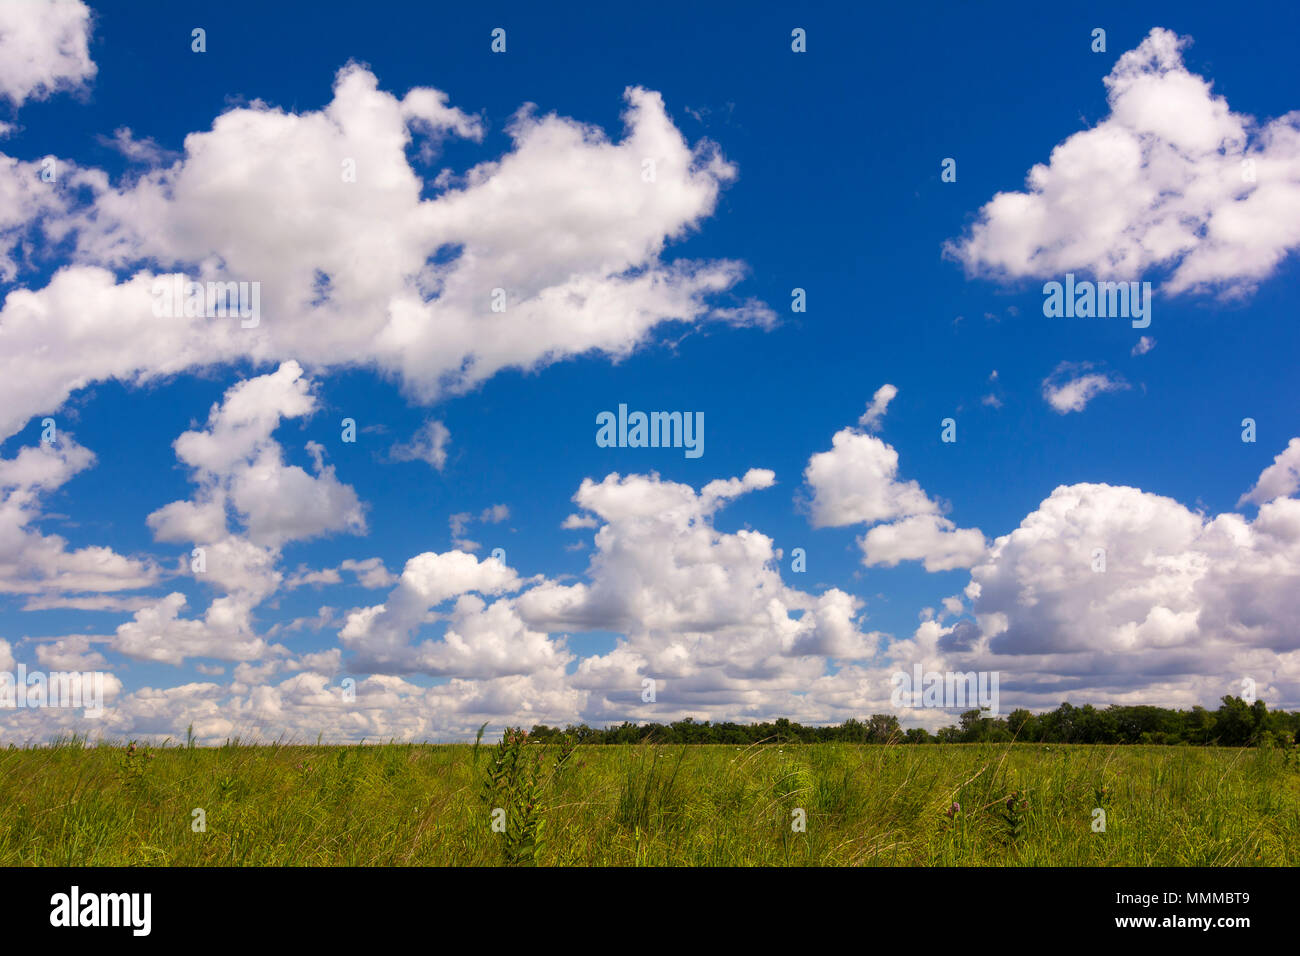 A country field of grasses against a beautiful white puffy cloud sky. Stock Photo